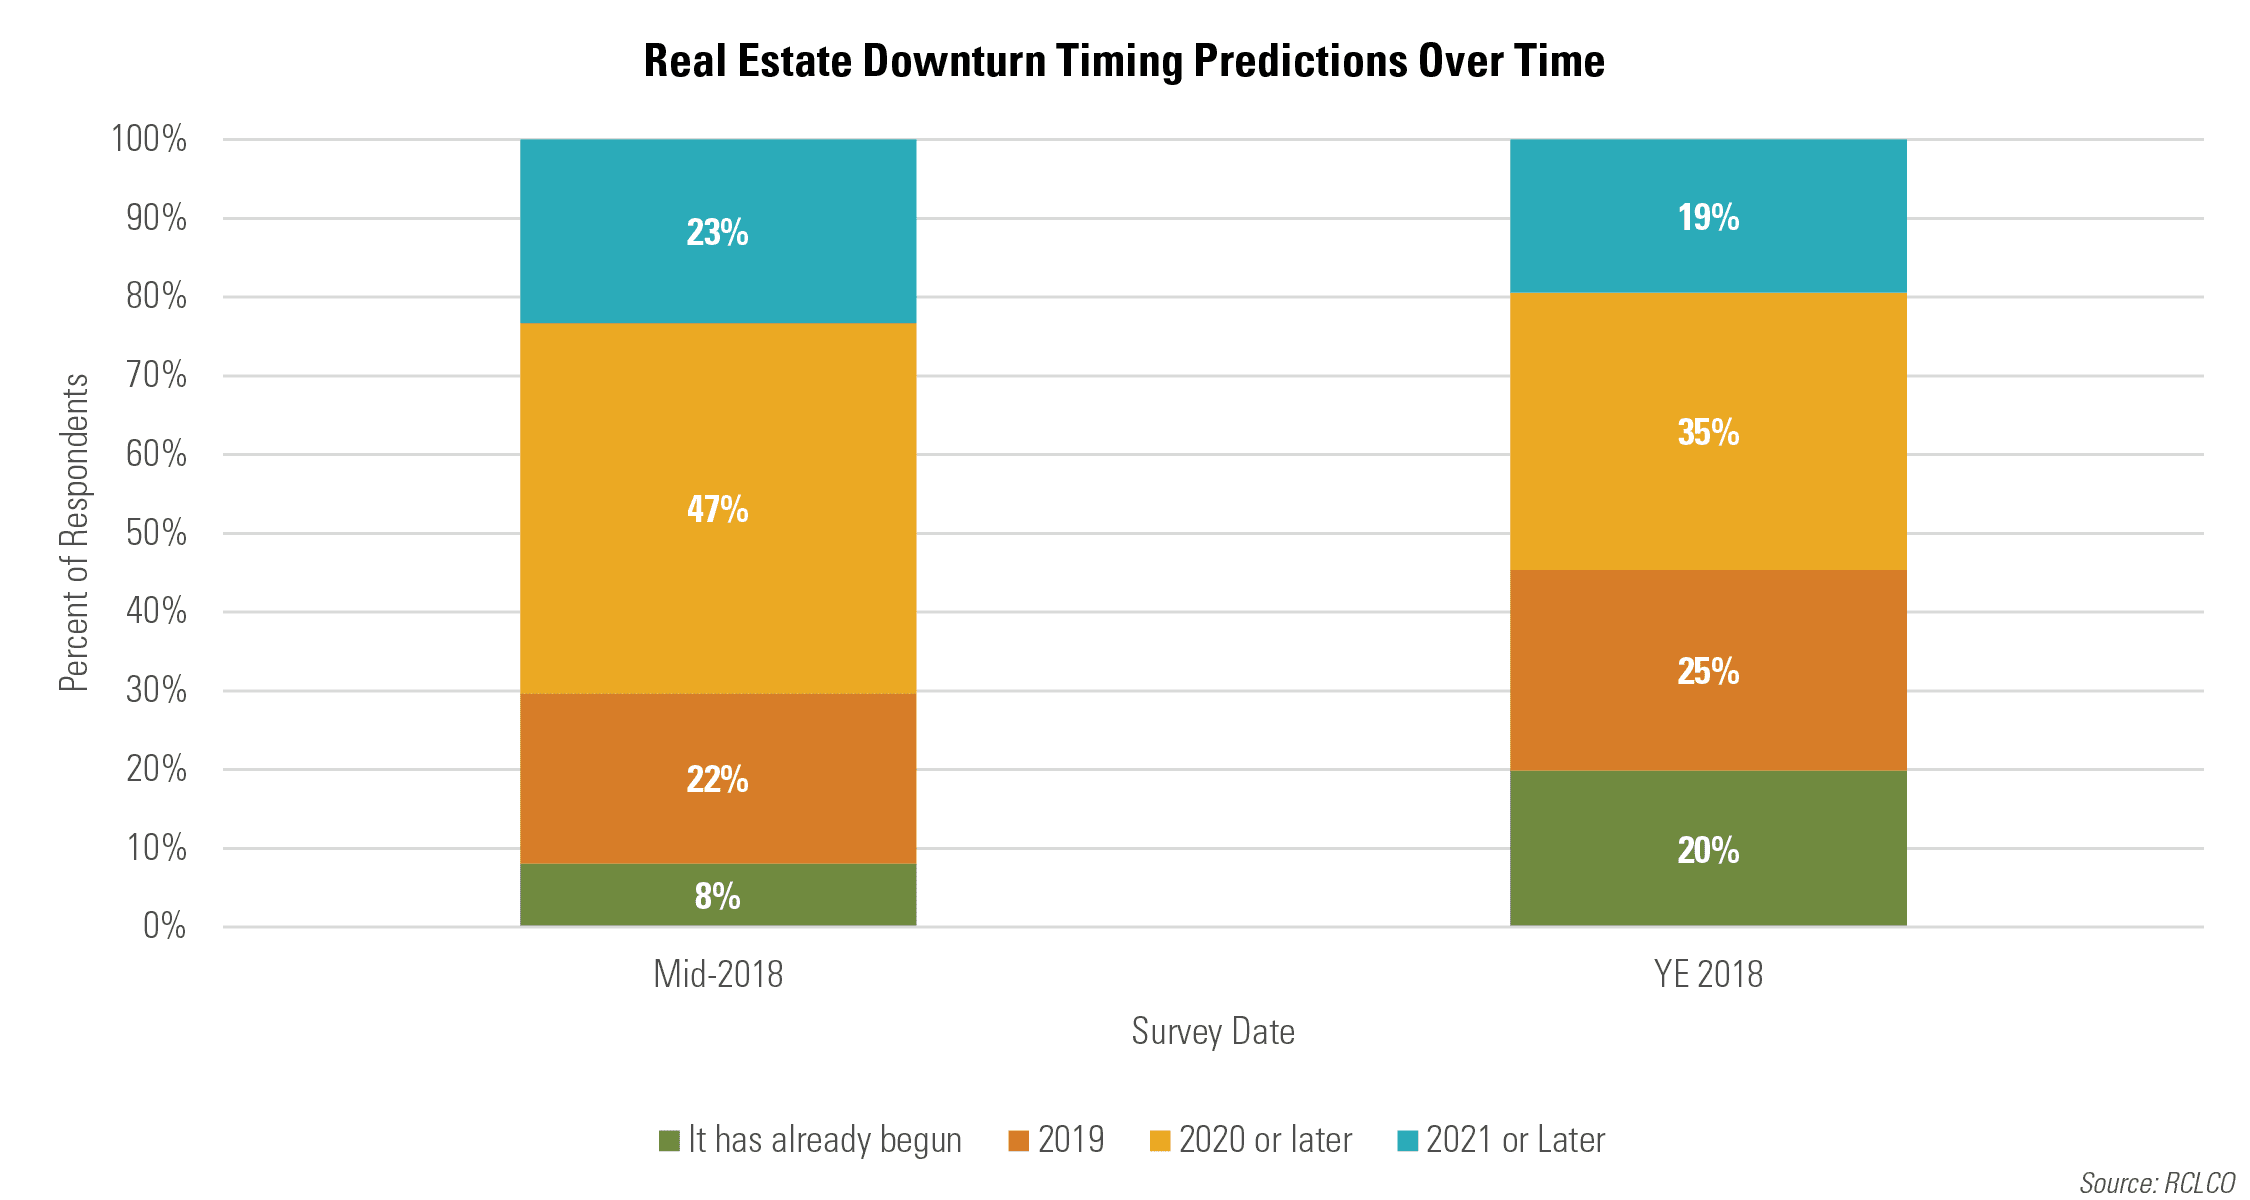 Real Estate Downturn Timing Predictions over Time